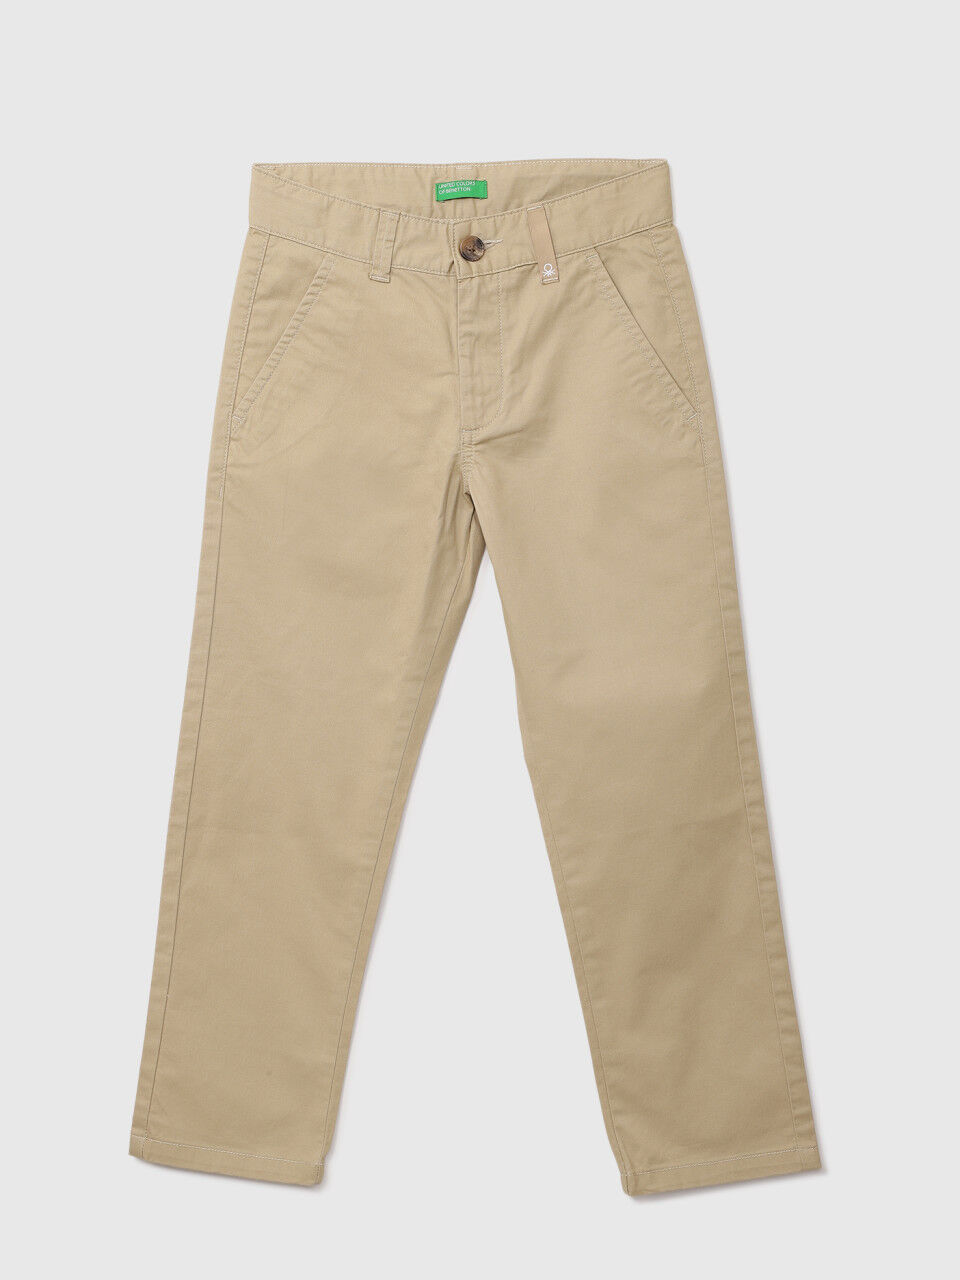 United Colors Of Benetton Boys Slim Fit Trousers